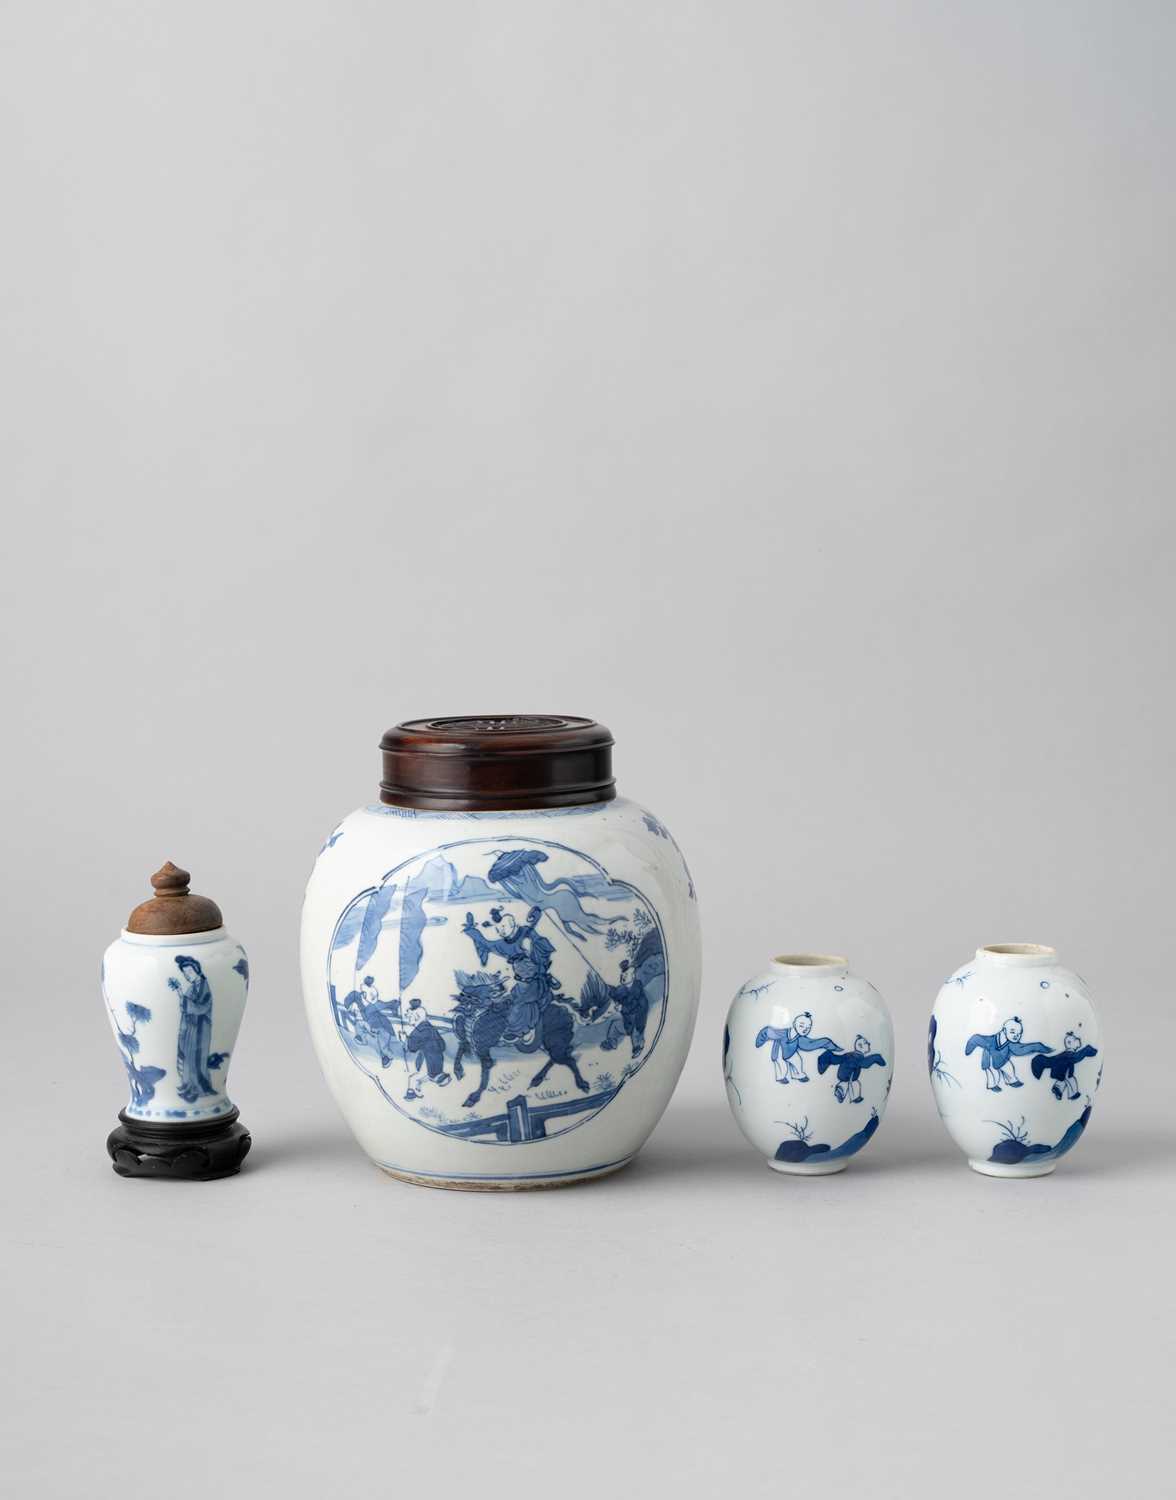 NO RESERVE FOUR CHINESE BLUE AND WHITE ITEMS KANGXI 1662-1722 Comprising: an ovoid jar decorated